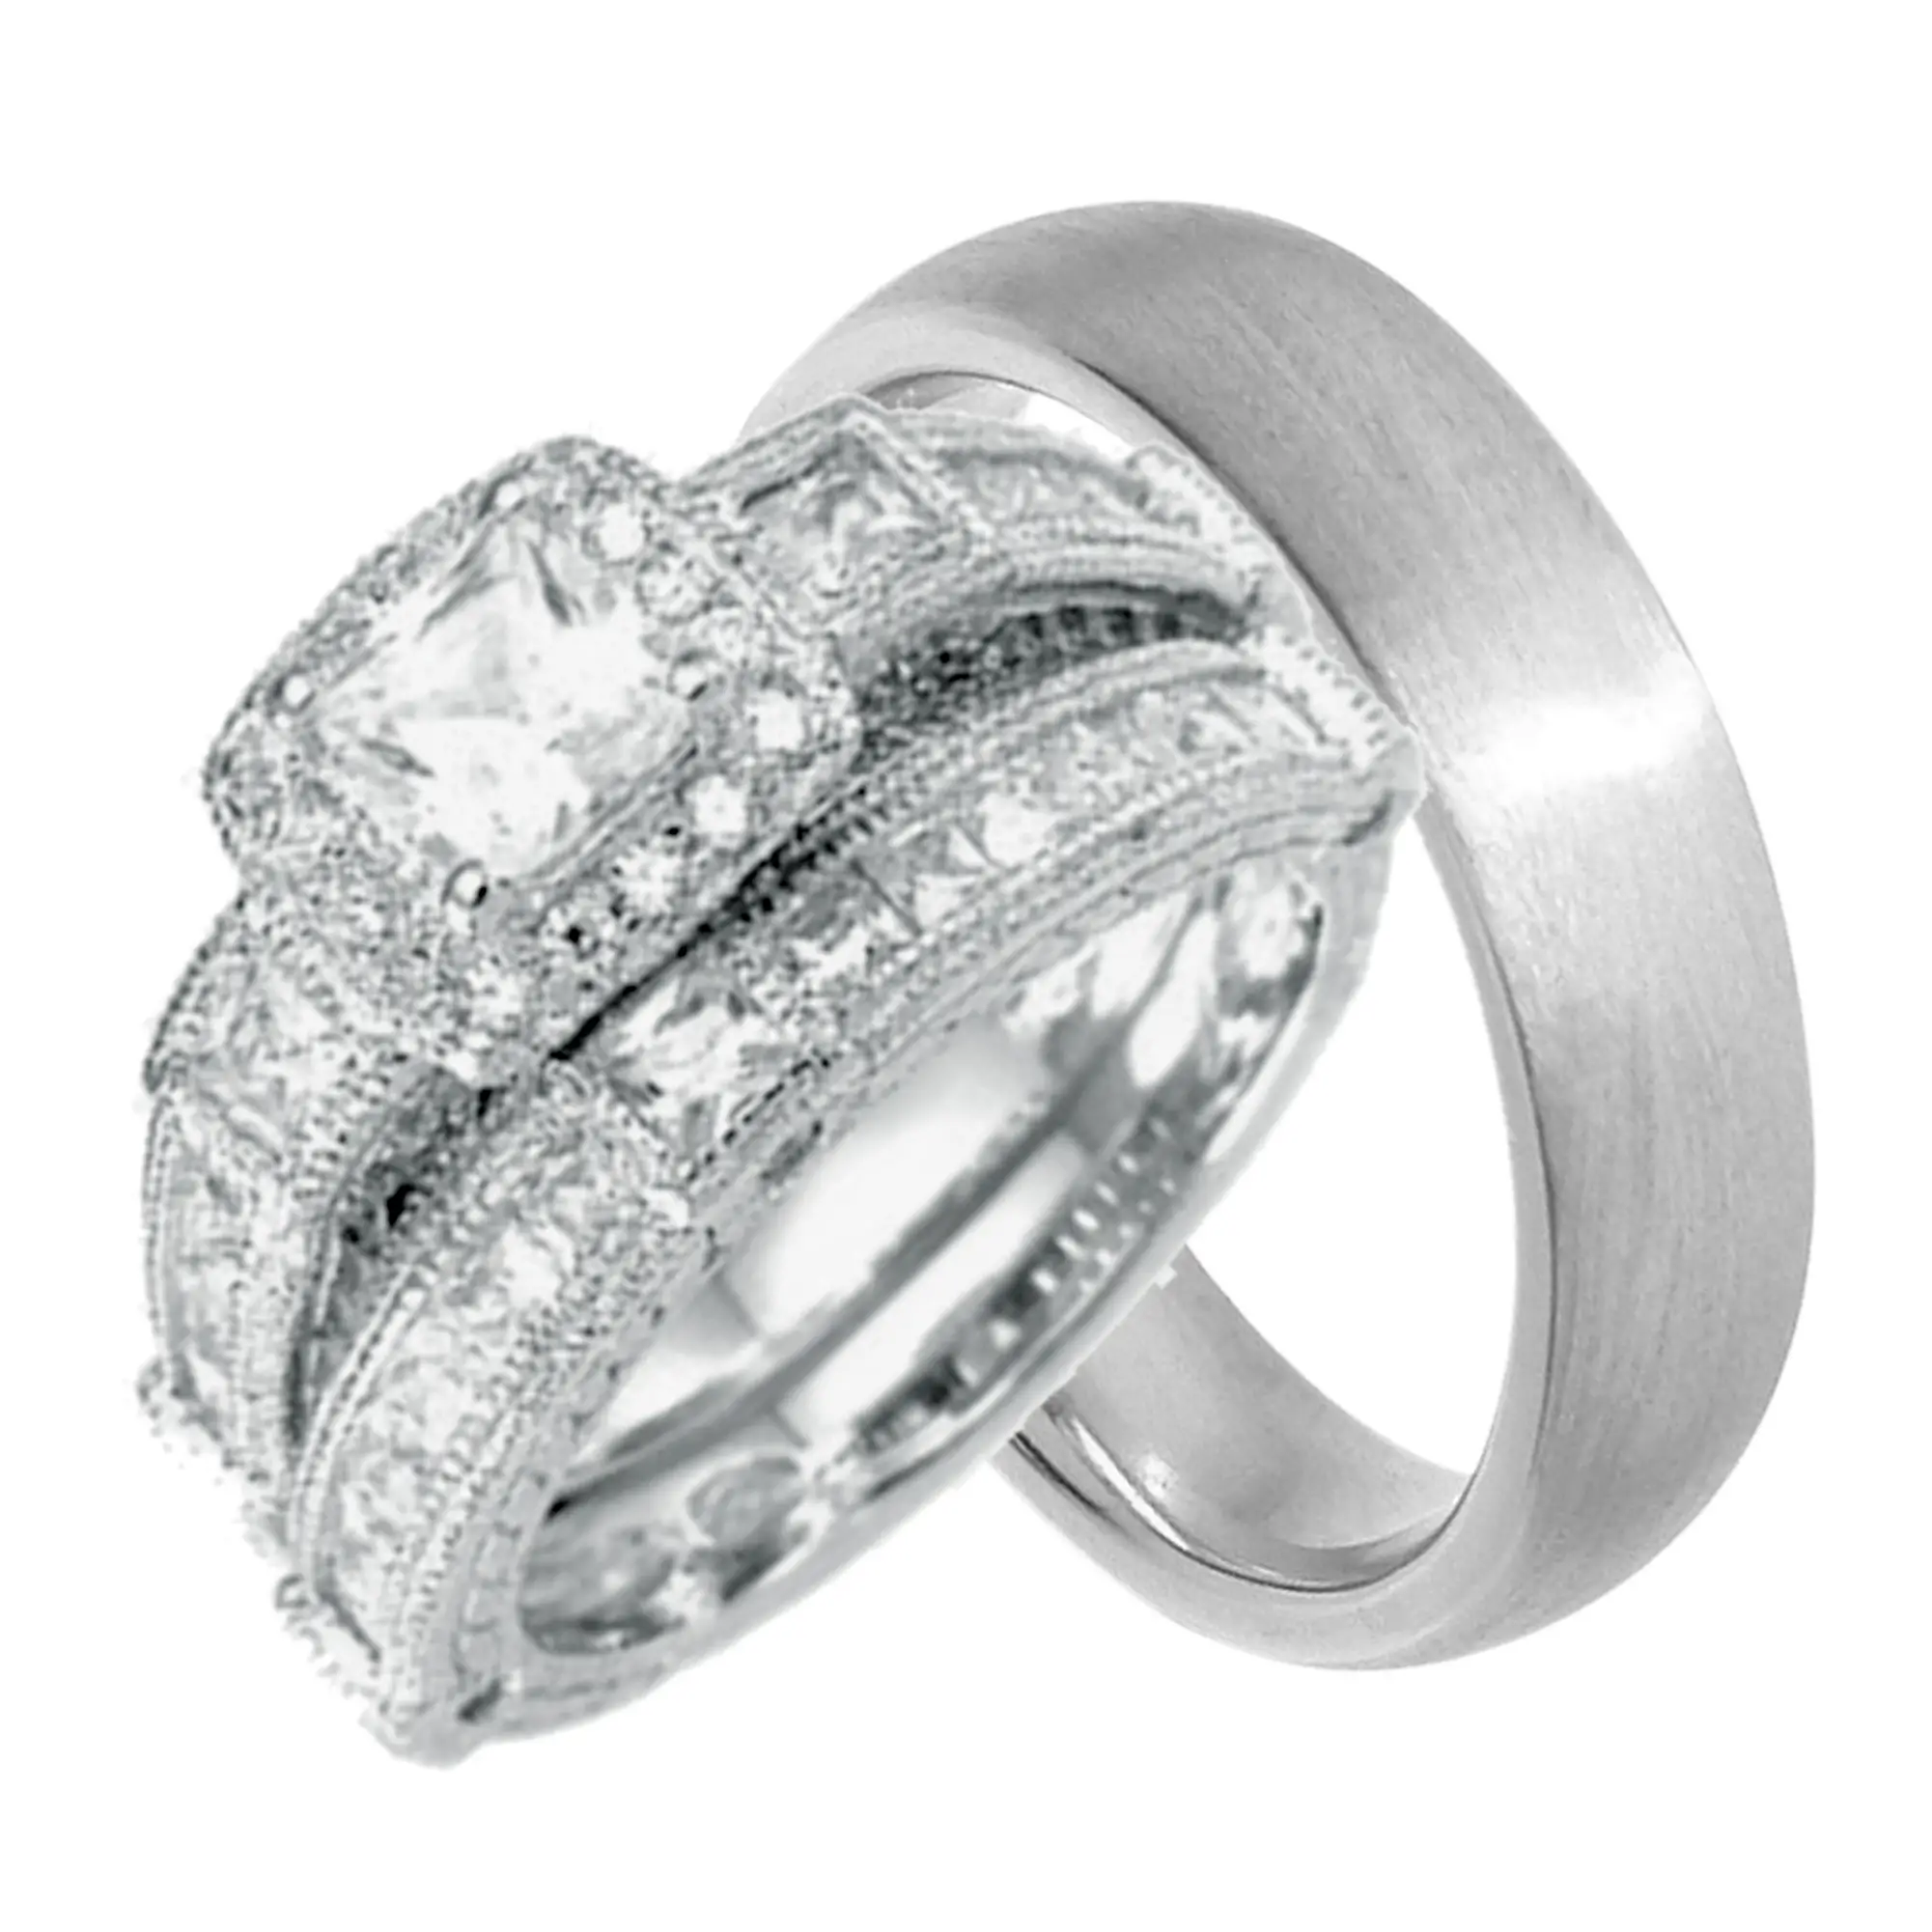 25 Ideas for Cheap Wedding Rings Sets for Him and Her